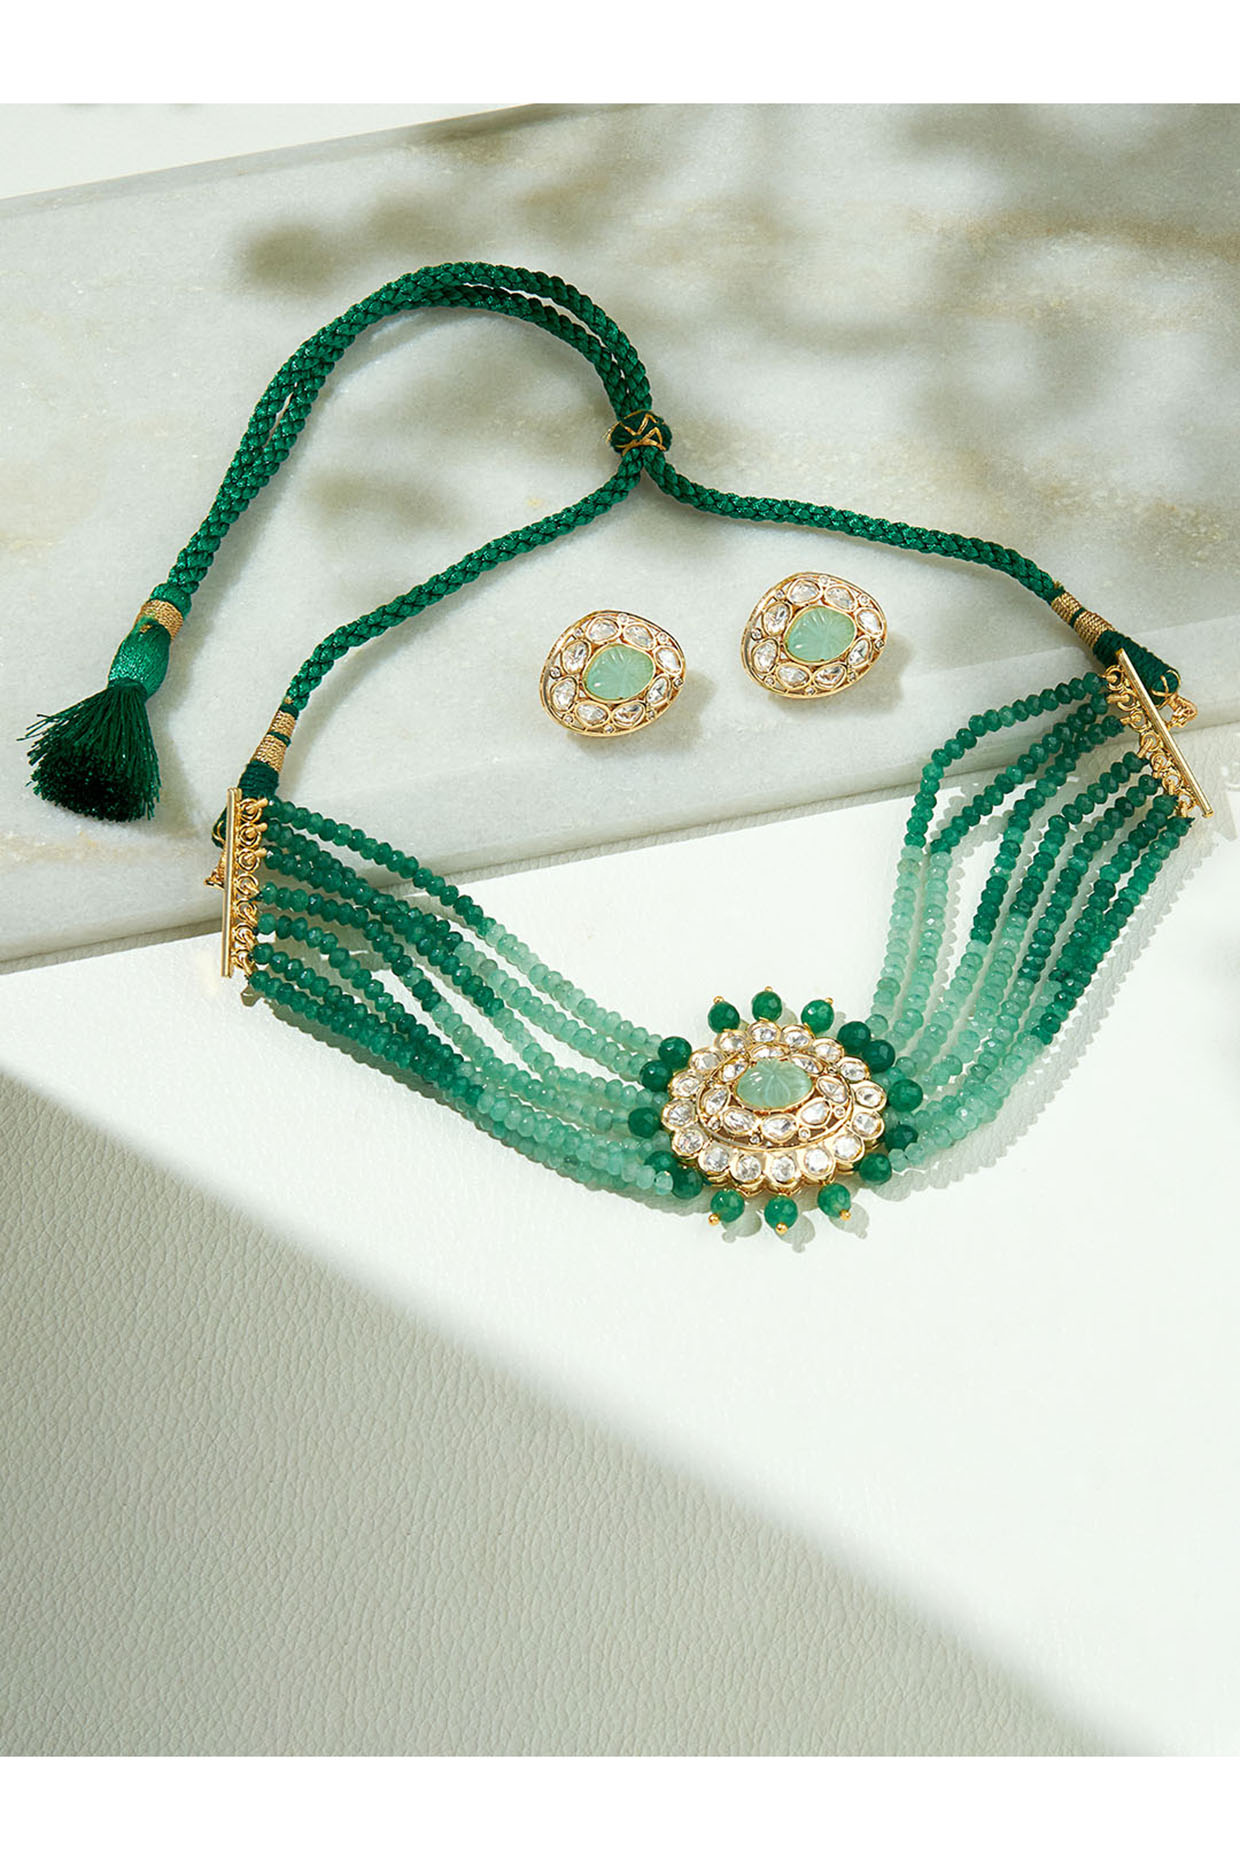 Gold Finish Kundan Polki & Green Agate Beaded Choker Necklace Set Design by  Joules By Radhika at Pernia's Pop Up Shop 2024